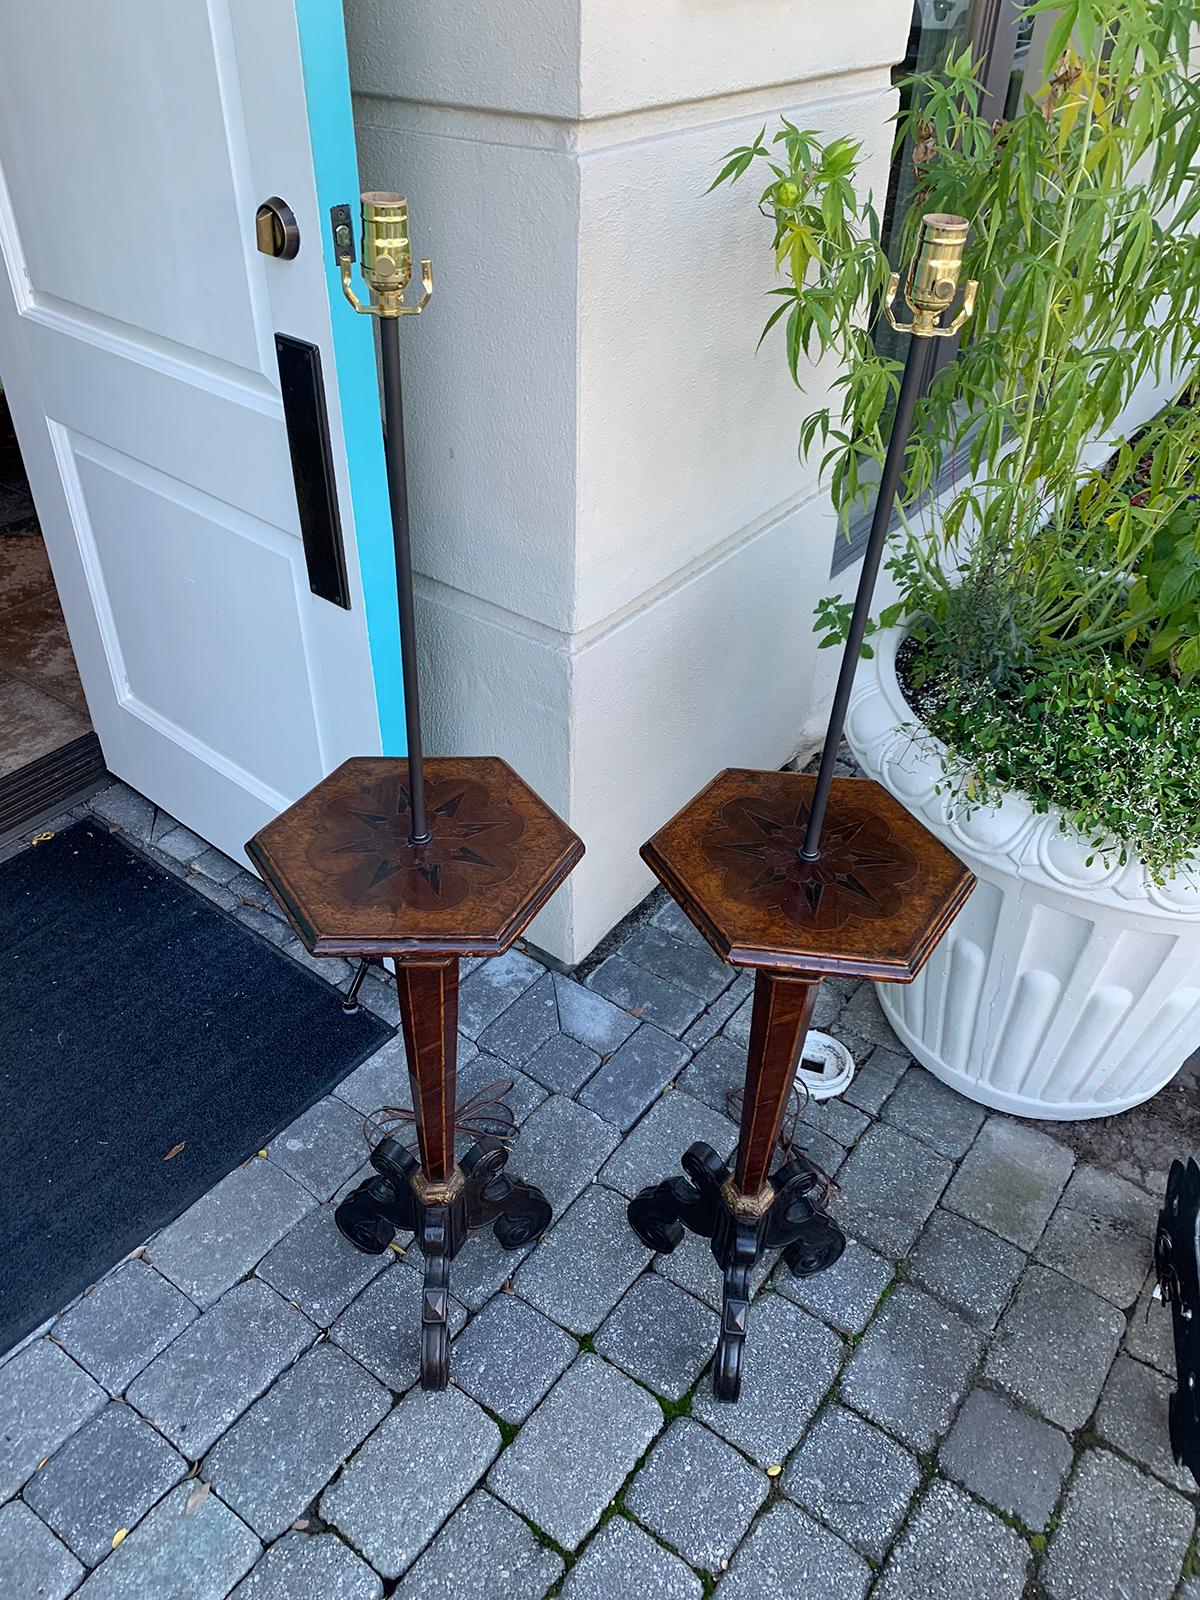 Inlay Pair of 18th-19th Century Inlaid Continental Pedestals as Floor Lamps